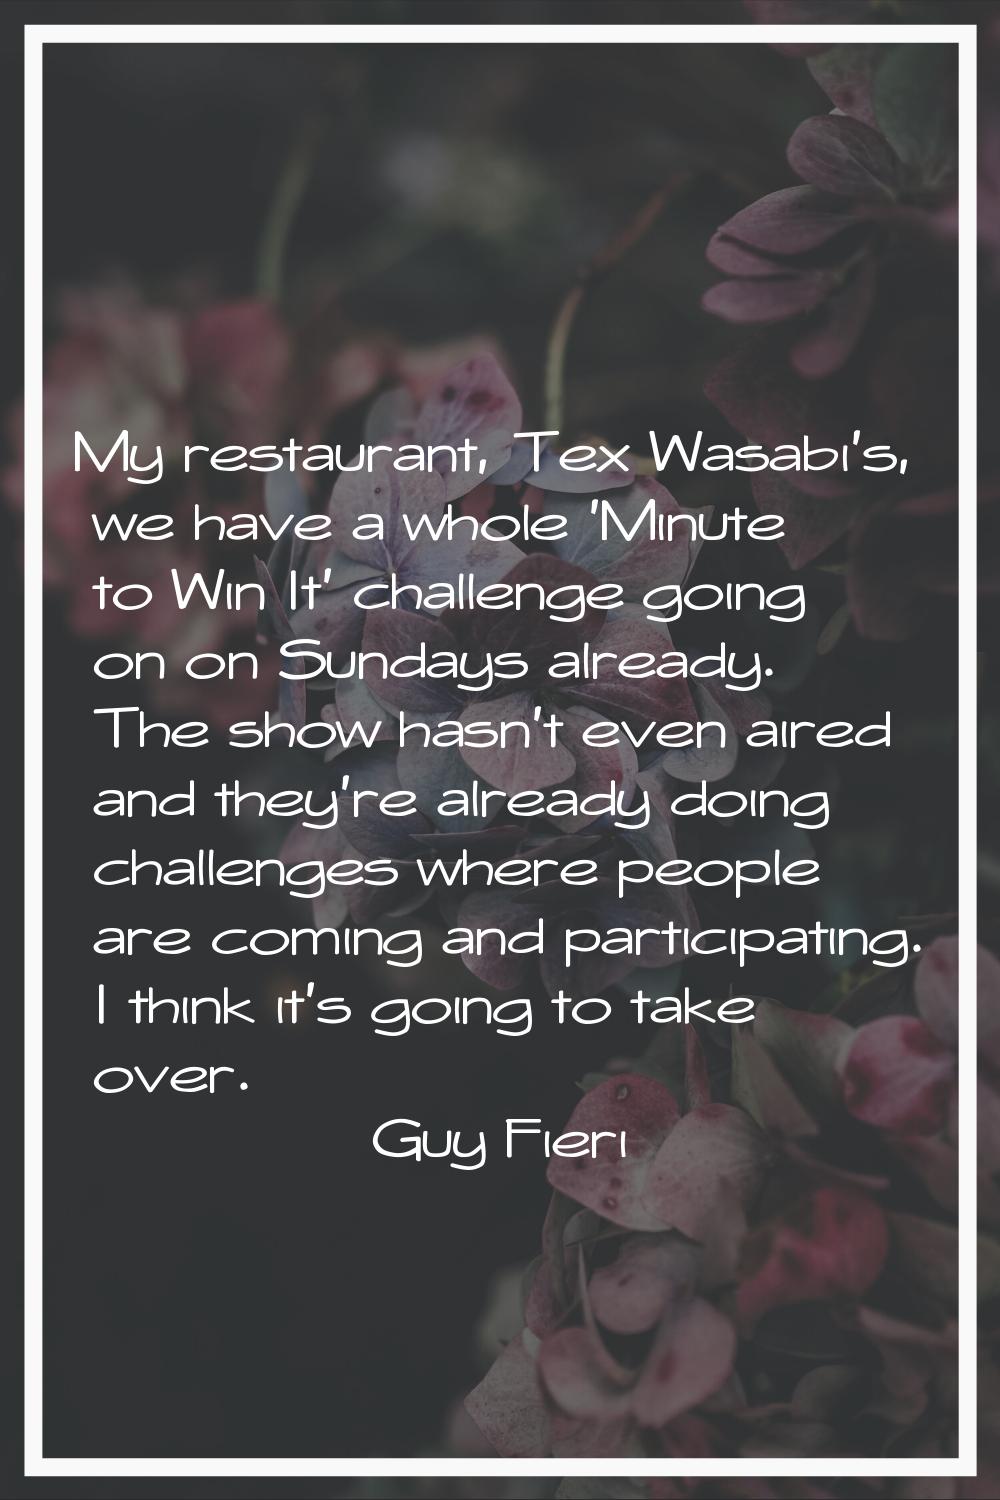 My restaurant, Tex Wasabi's, we have a whole 'Minute to Win It' challenge going on on Sundays alrea